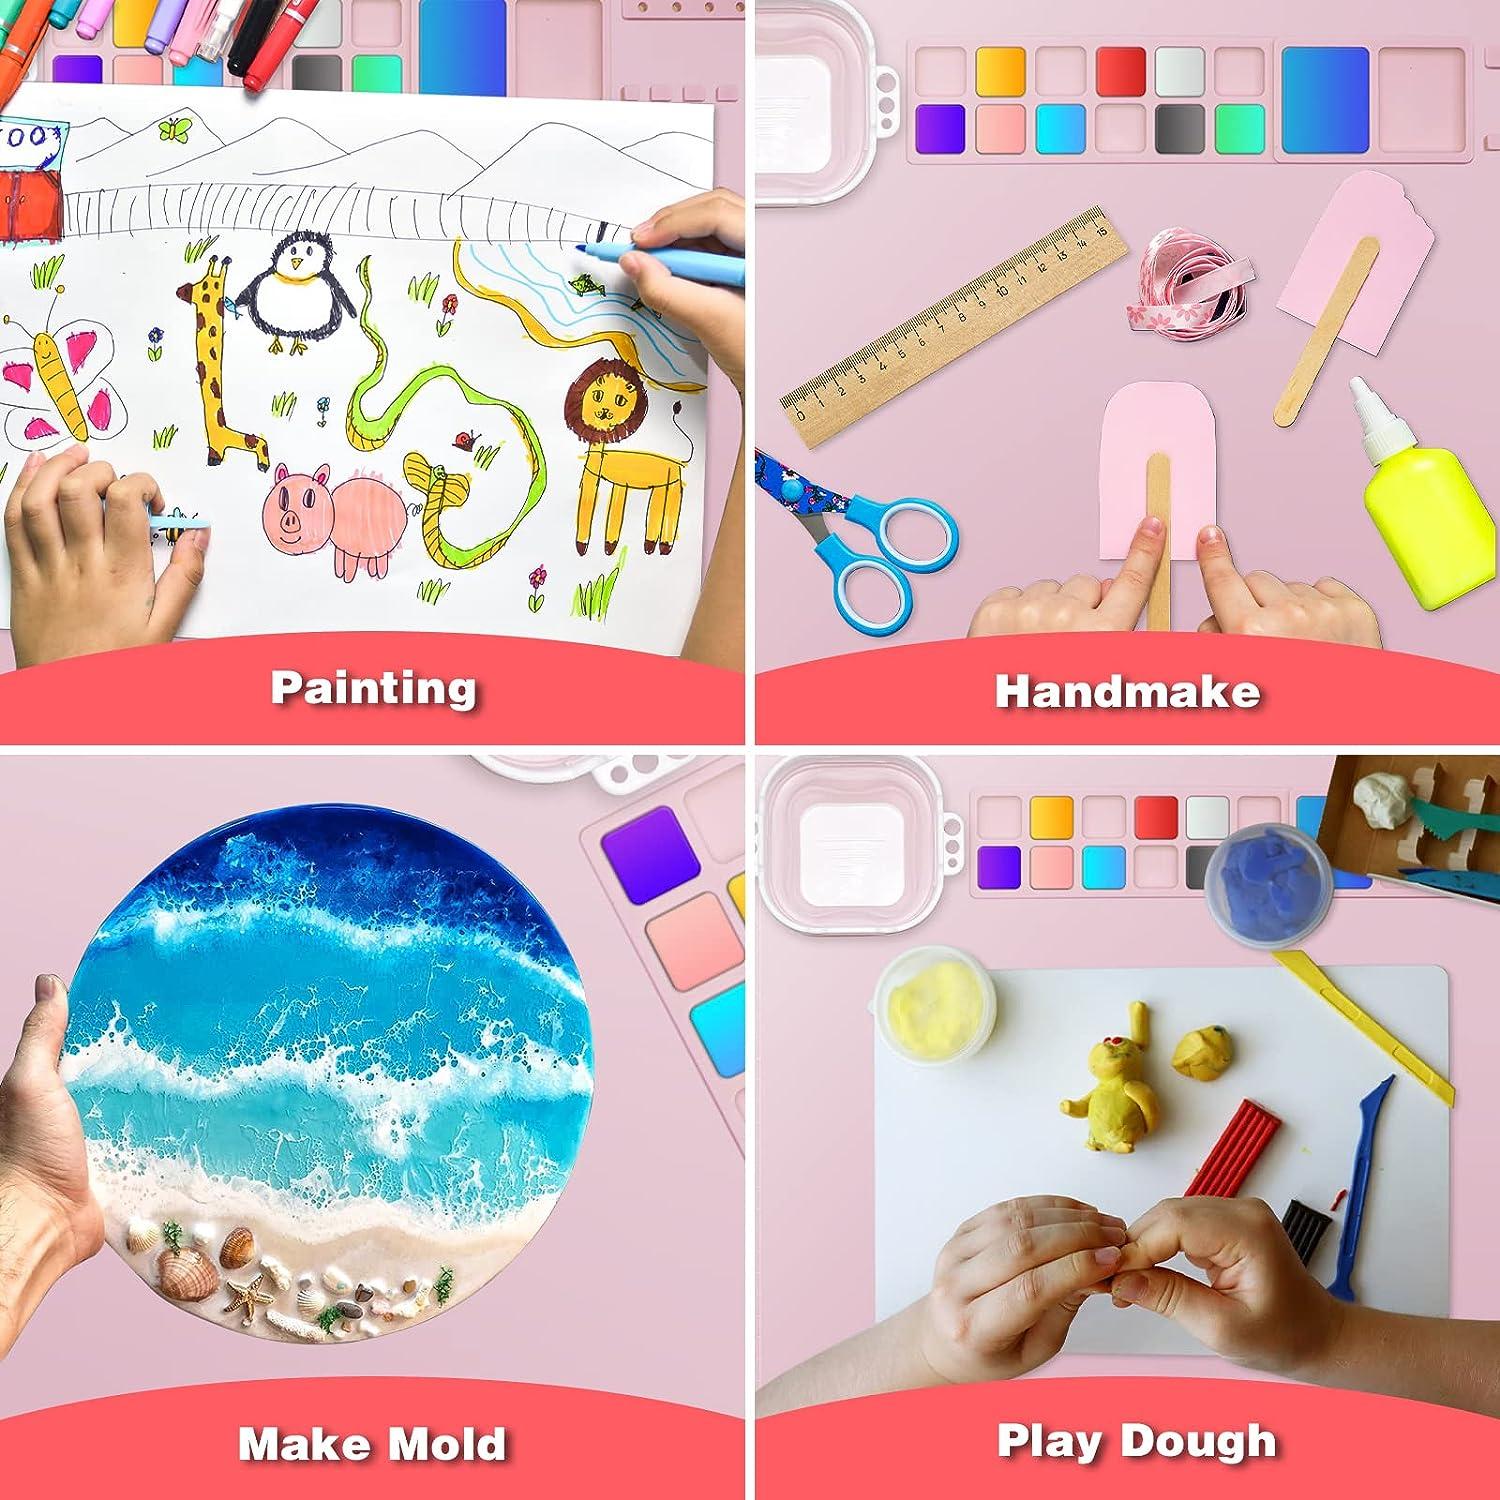 Reusable Silicone Painting Mat - Kids Silicone Painting Art Mat, Washable,  He